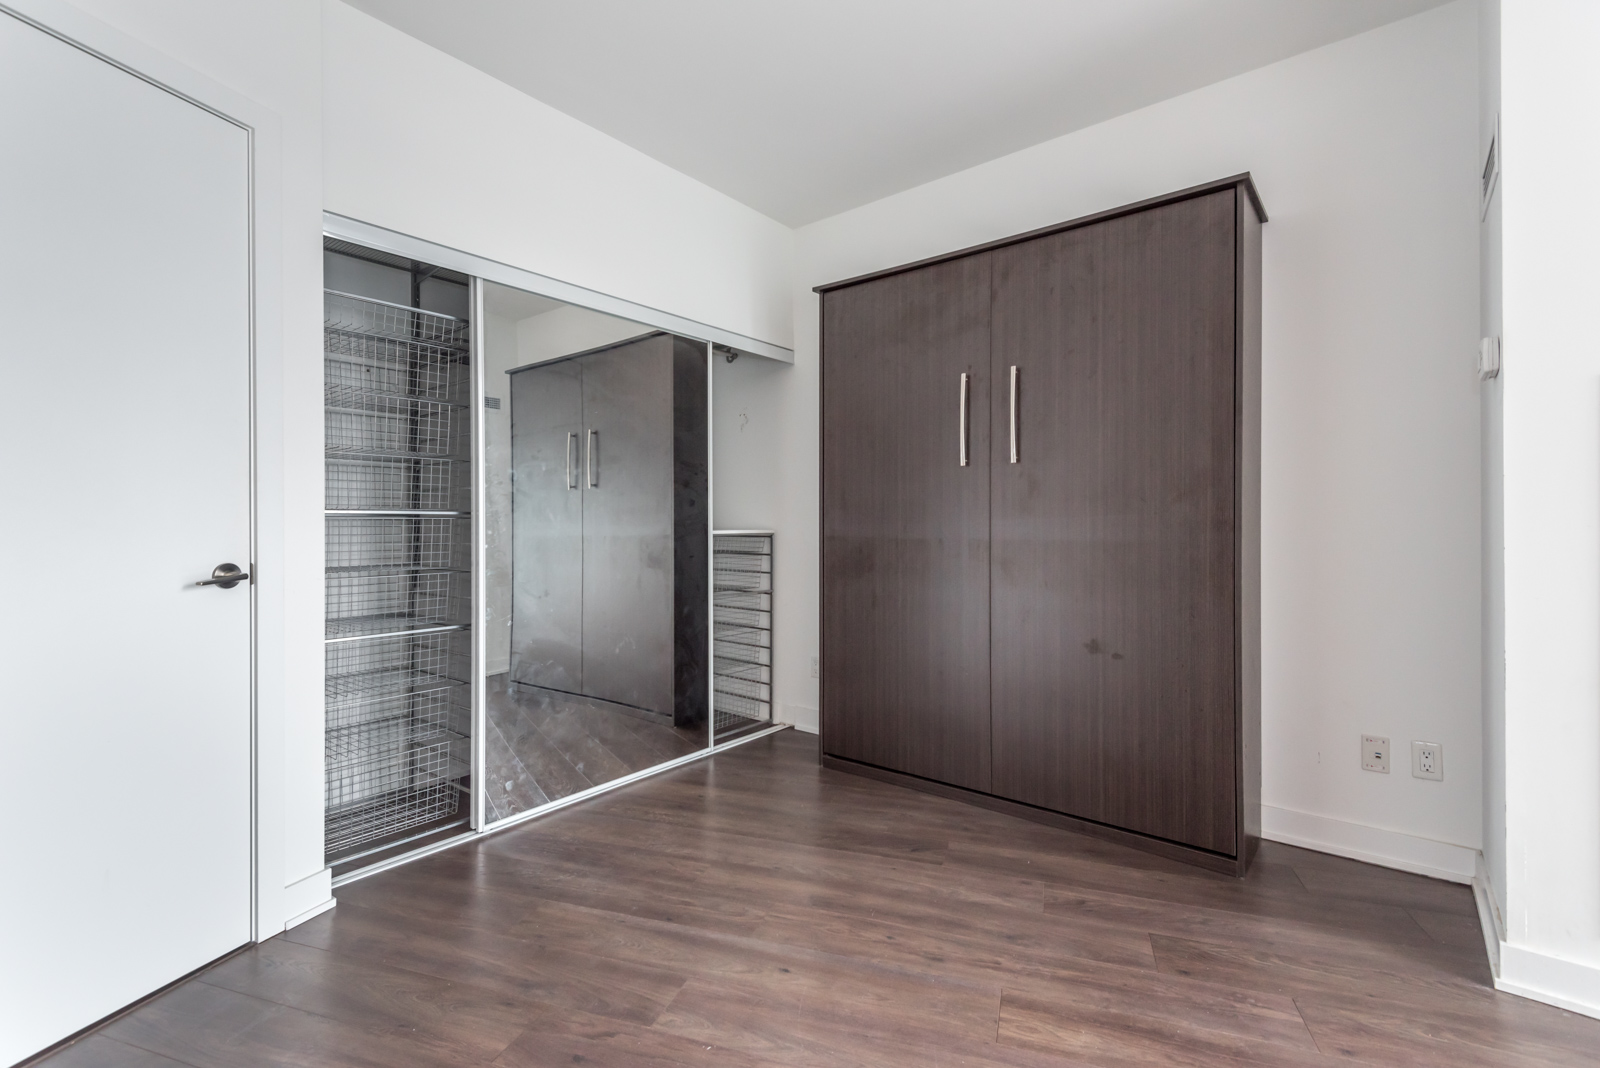 Photo showing closet with Murphy Bed tucked inside.